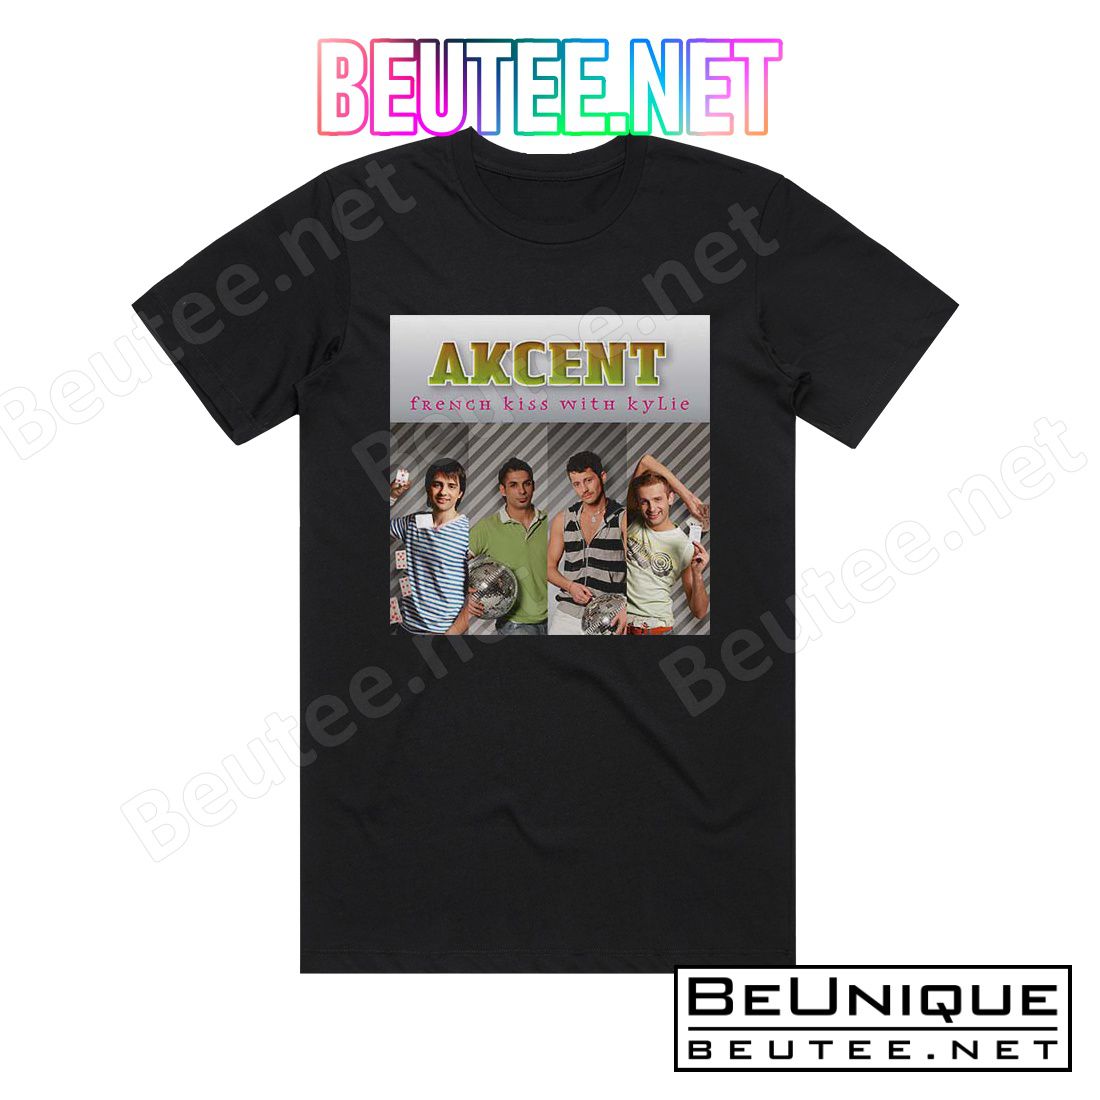 Akcent French Kiss With Kylie Album Cover T-shirt